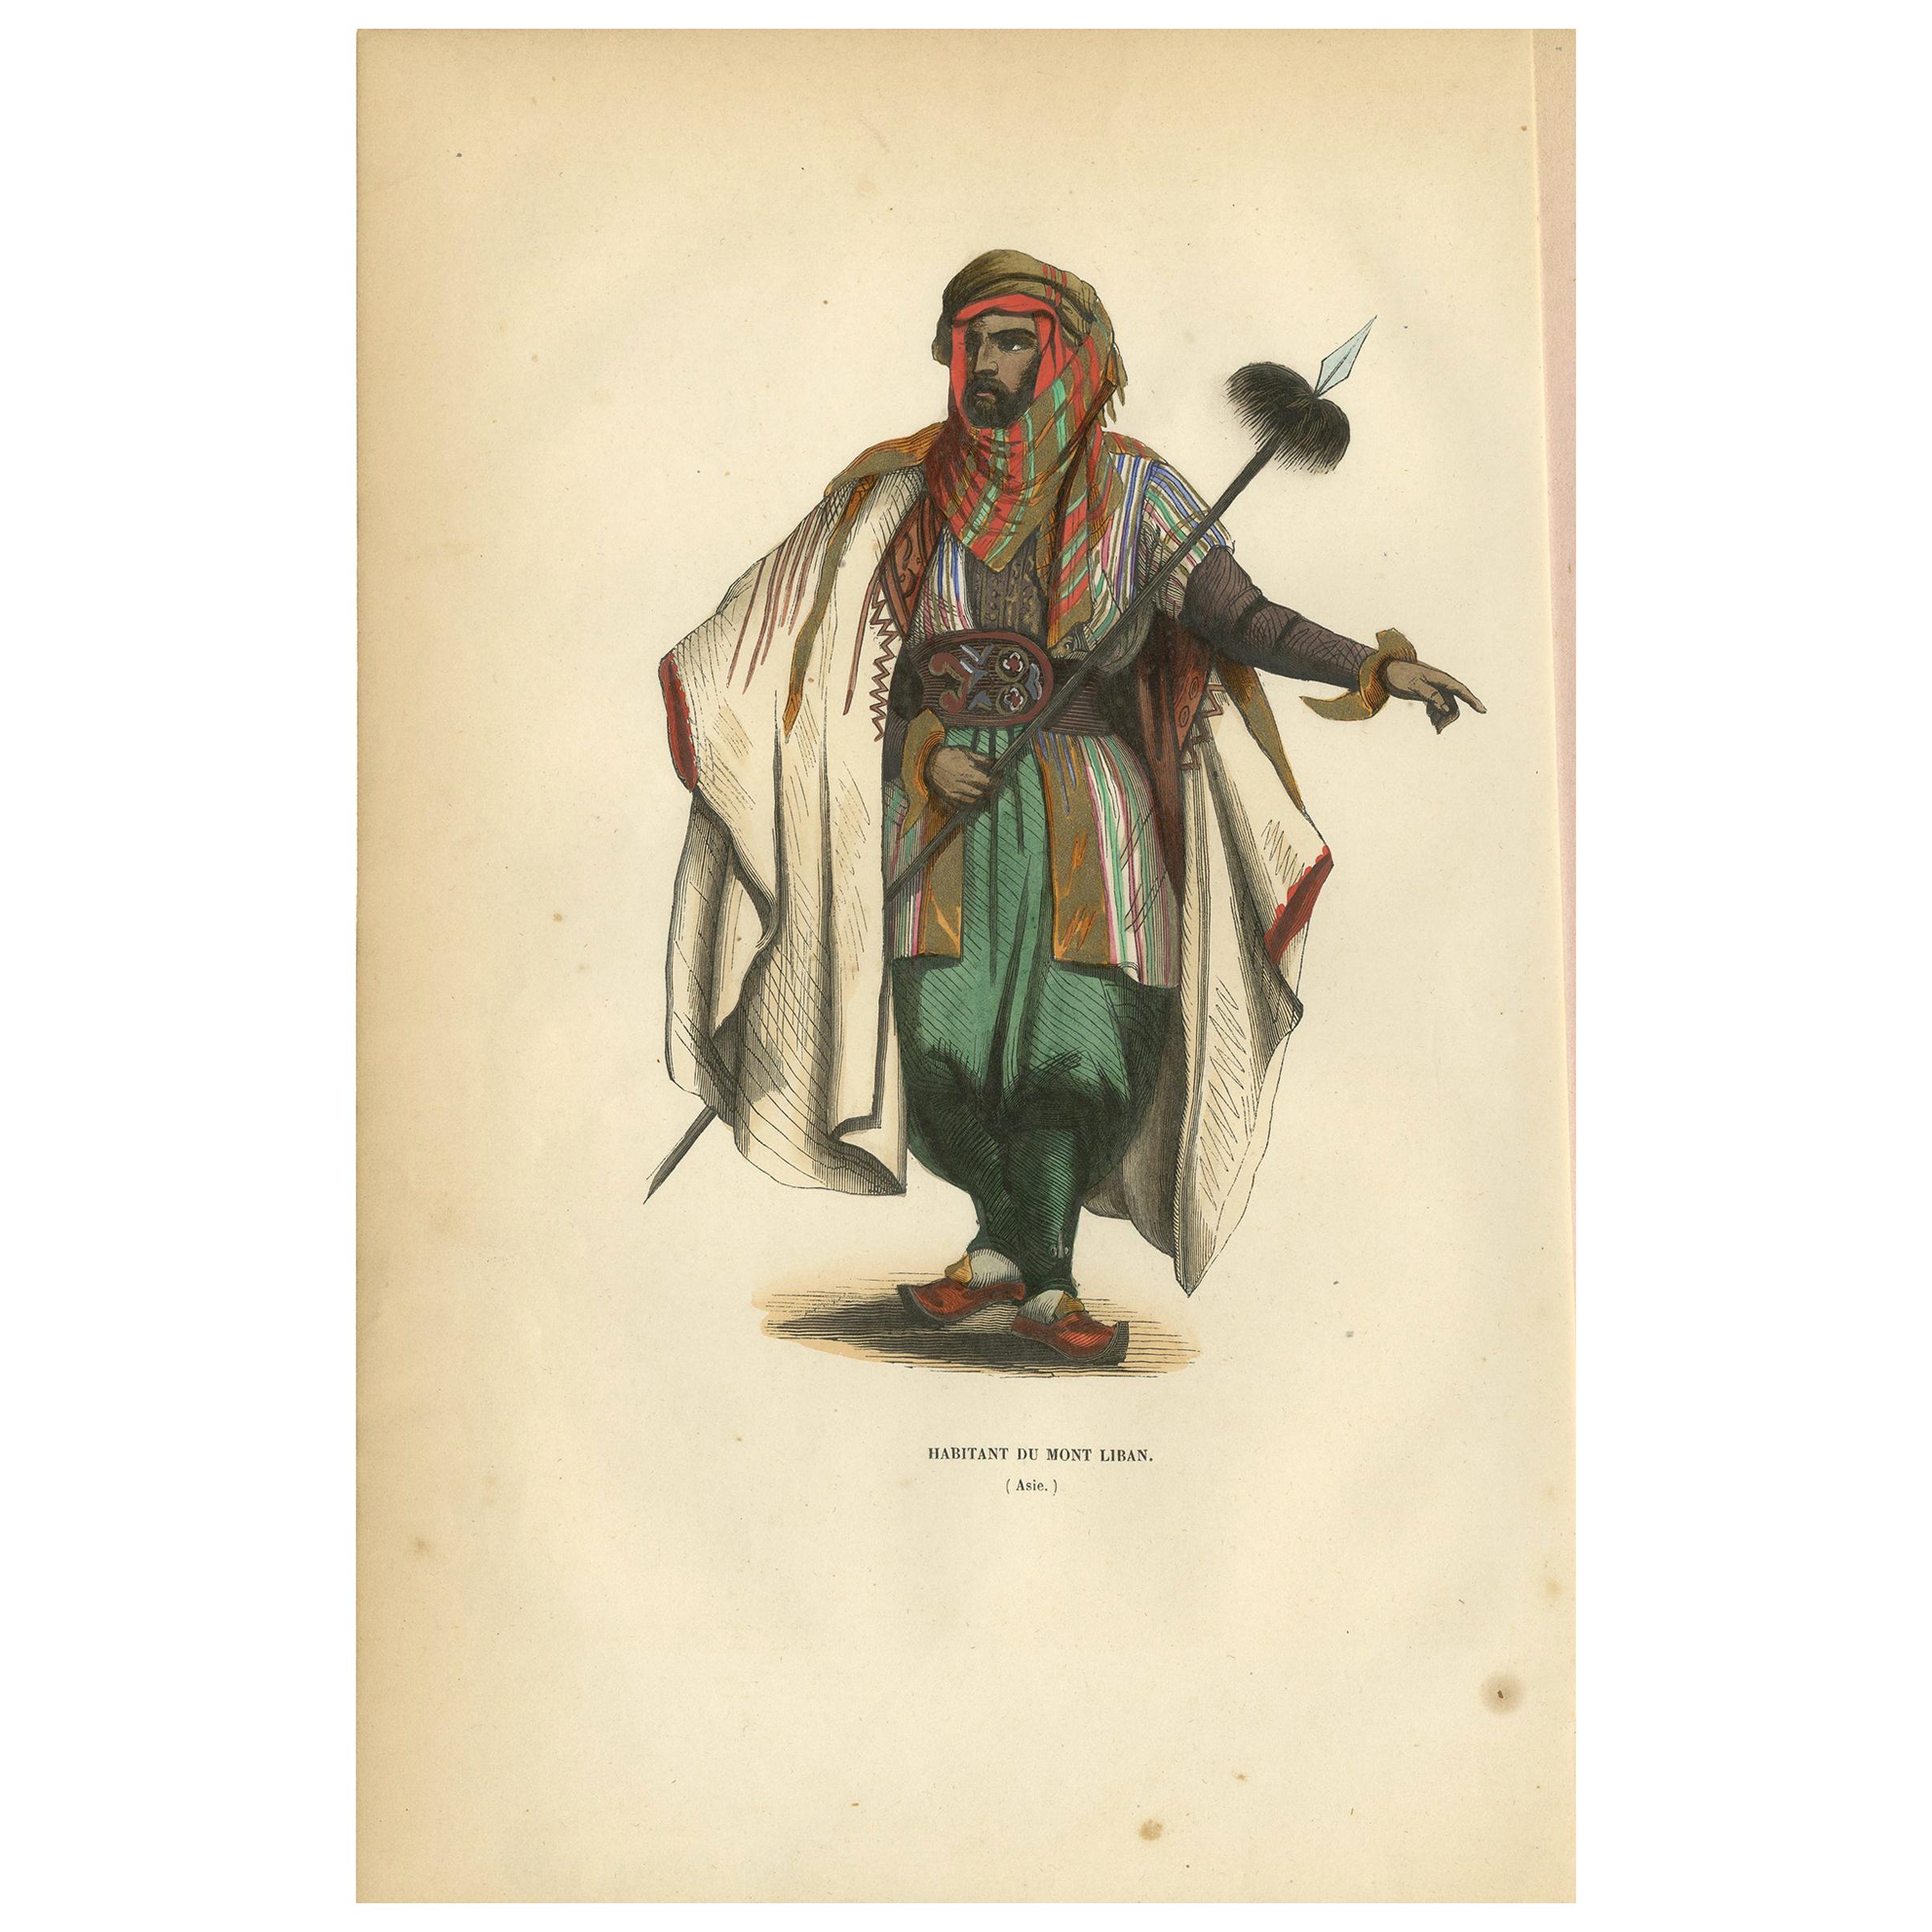 Antique Print of an Inhabitant of Mount Lebanon by Wahlen, 1843